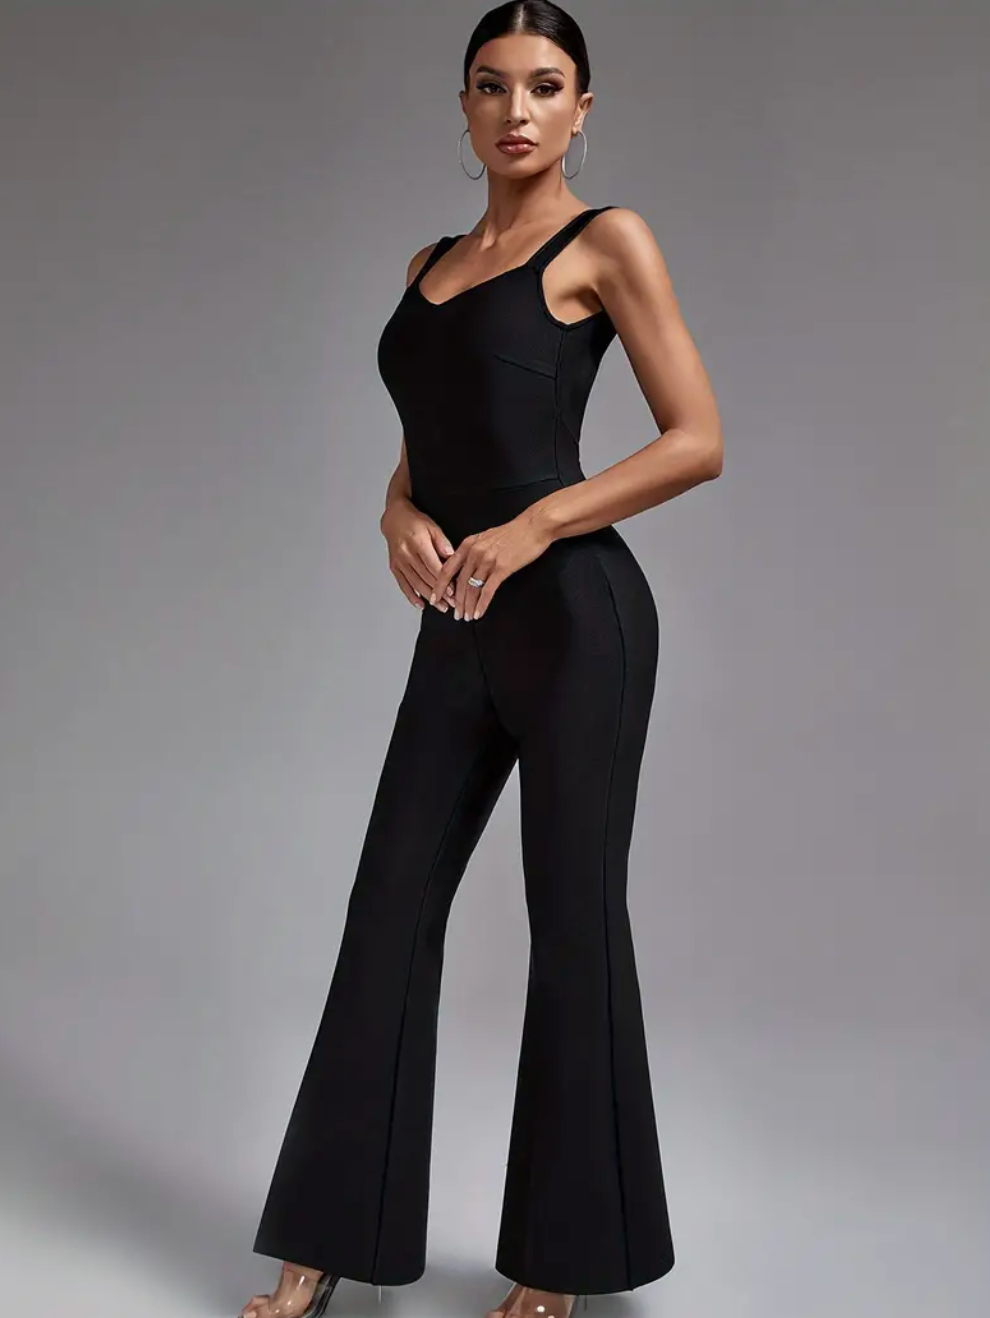 LLstyle Backless Strap Solid Jumpsuit